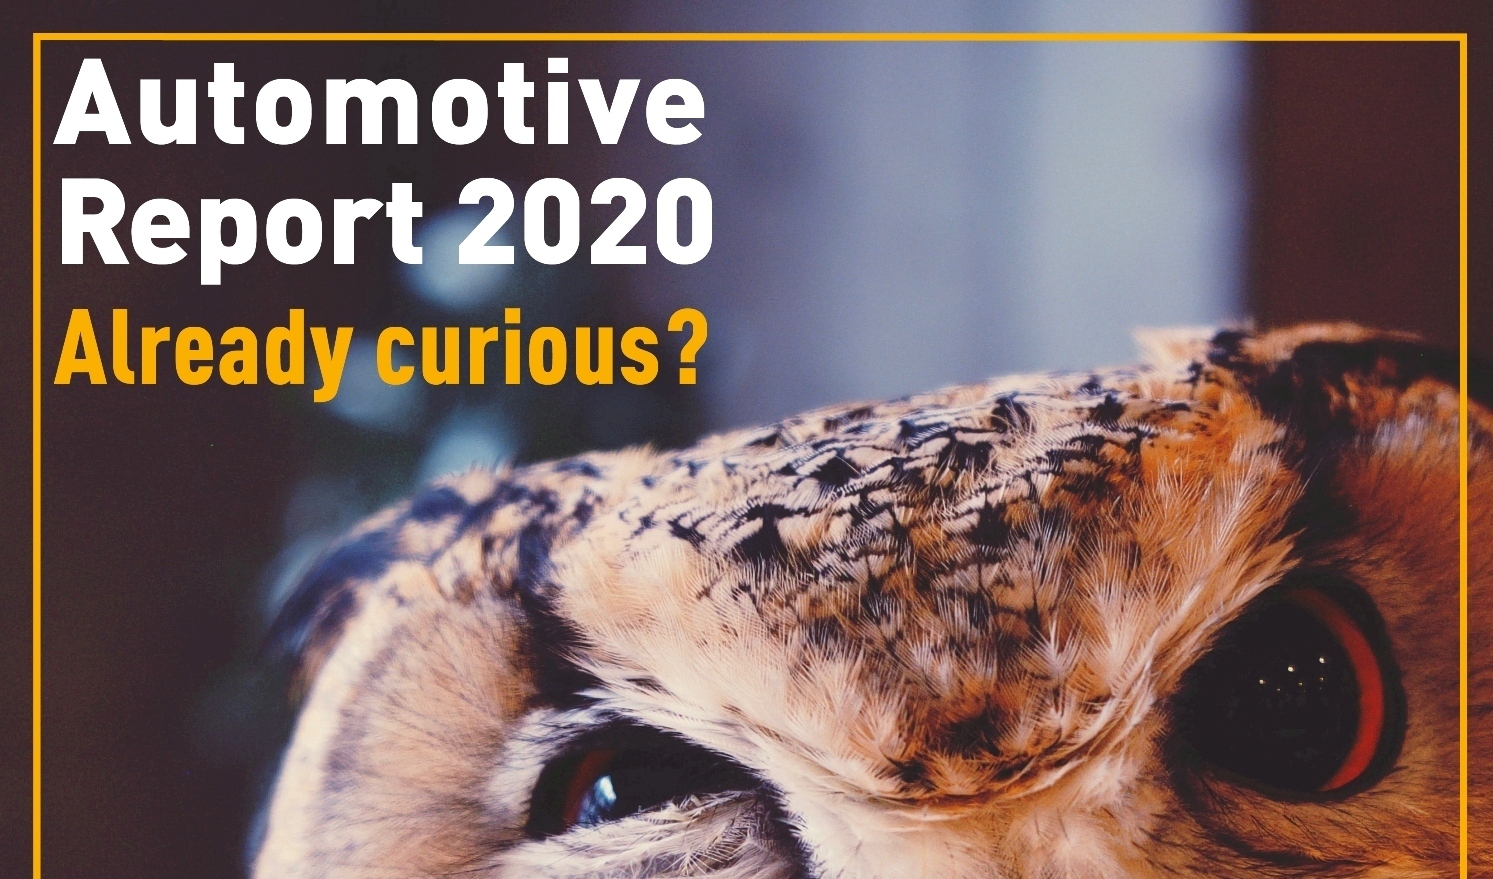 Automotive Report 2020 - Deeper Data Analysis in a New Aesthetic Appearance